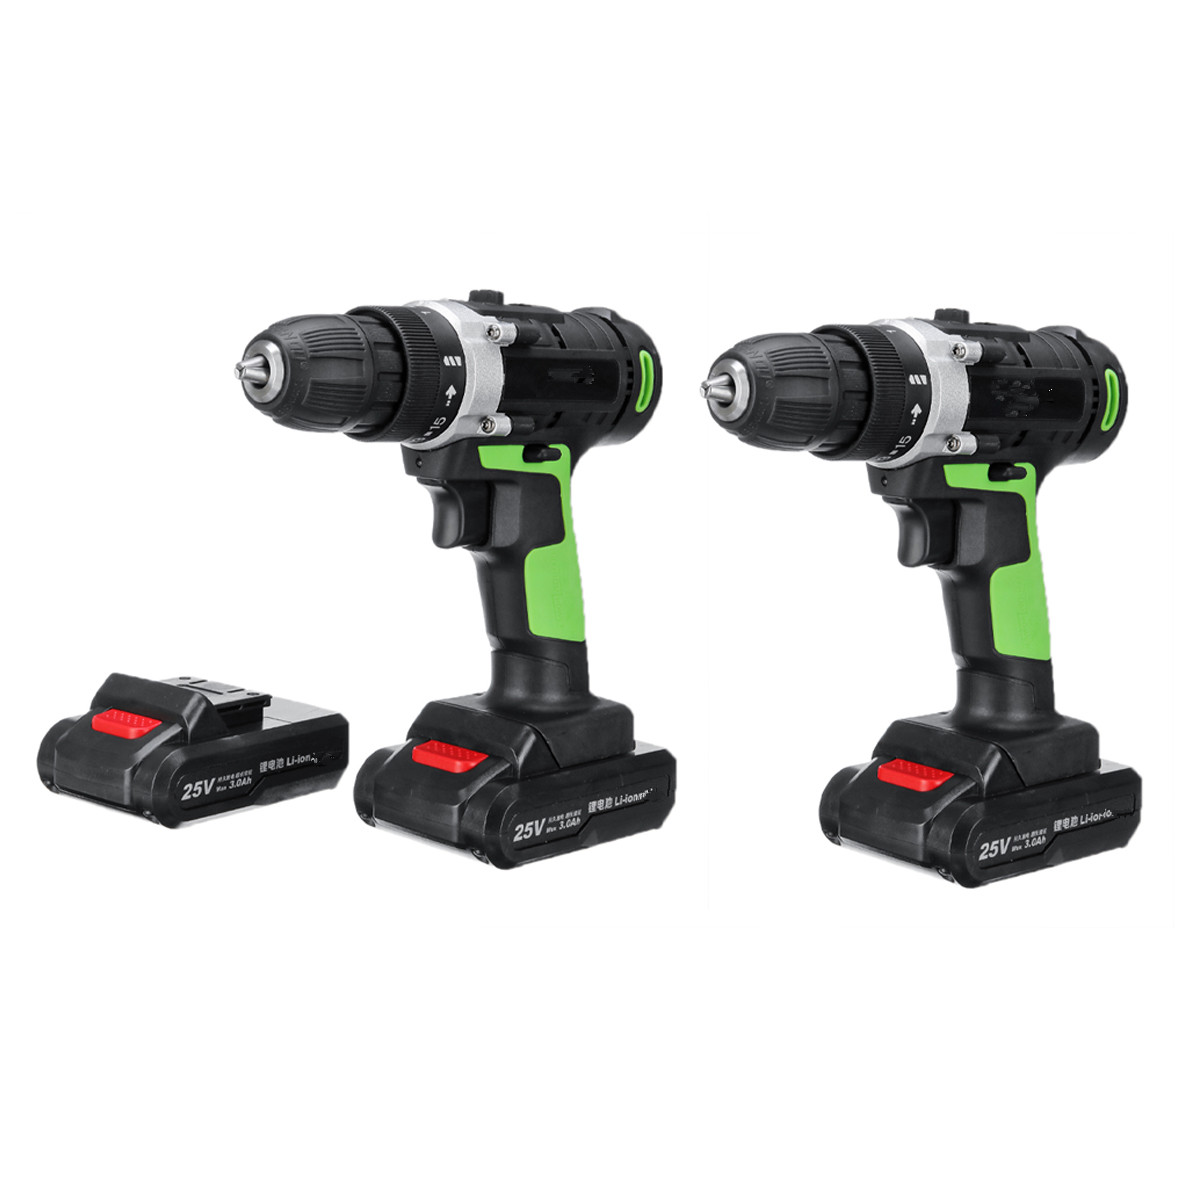 25V-Rechargeable-Cordless-Electric-Drill-Screwdriver-W-1-or-2-Lithium-Battery-1500mAh-1430671